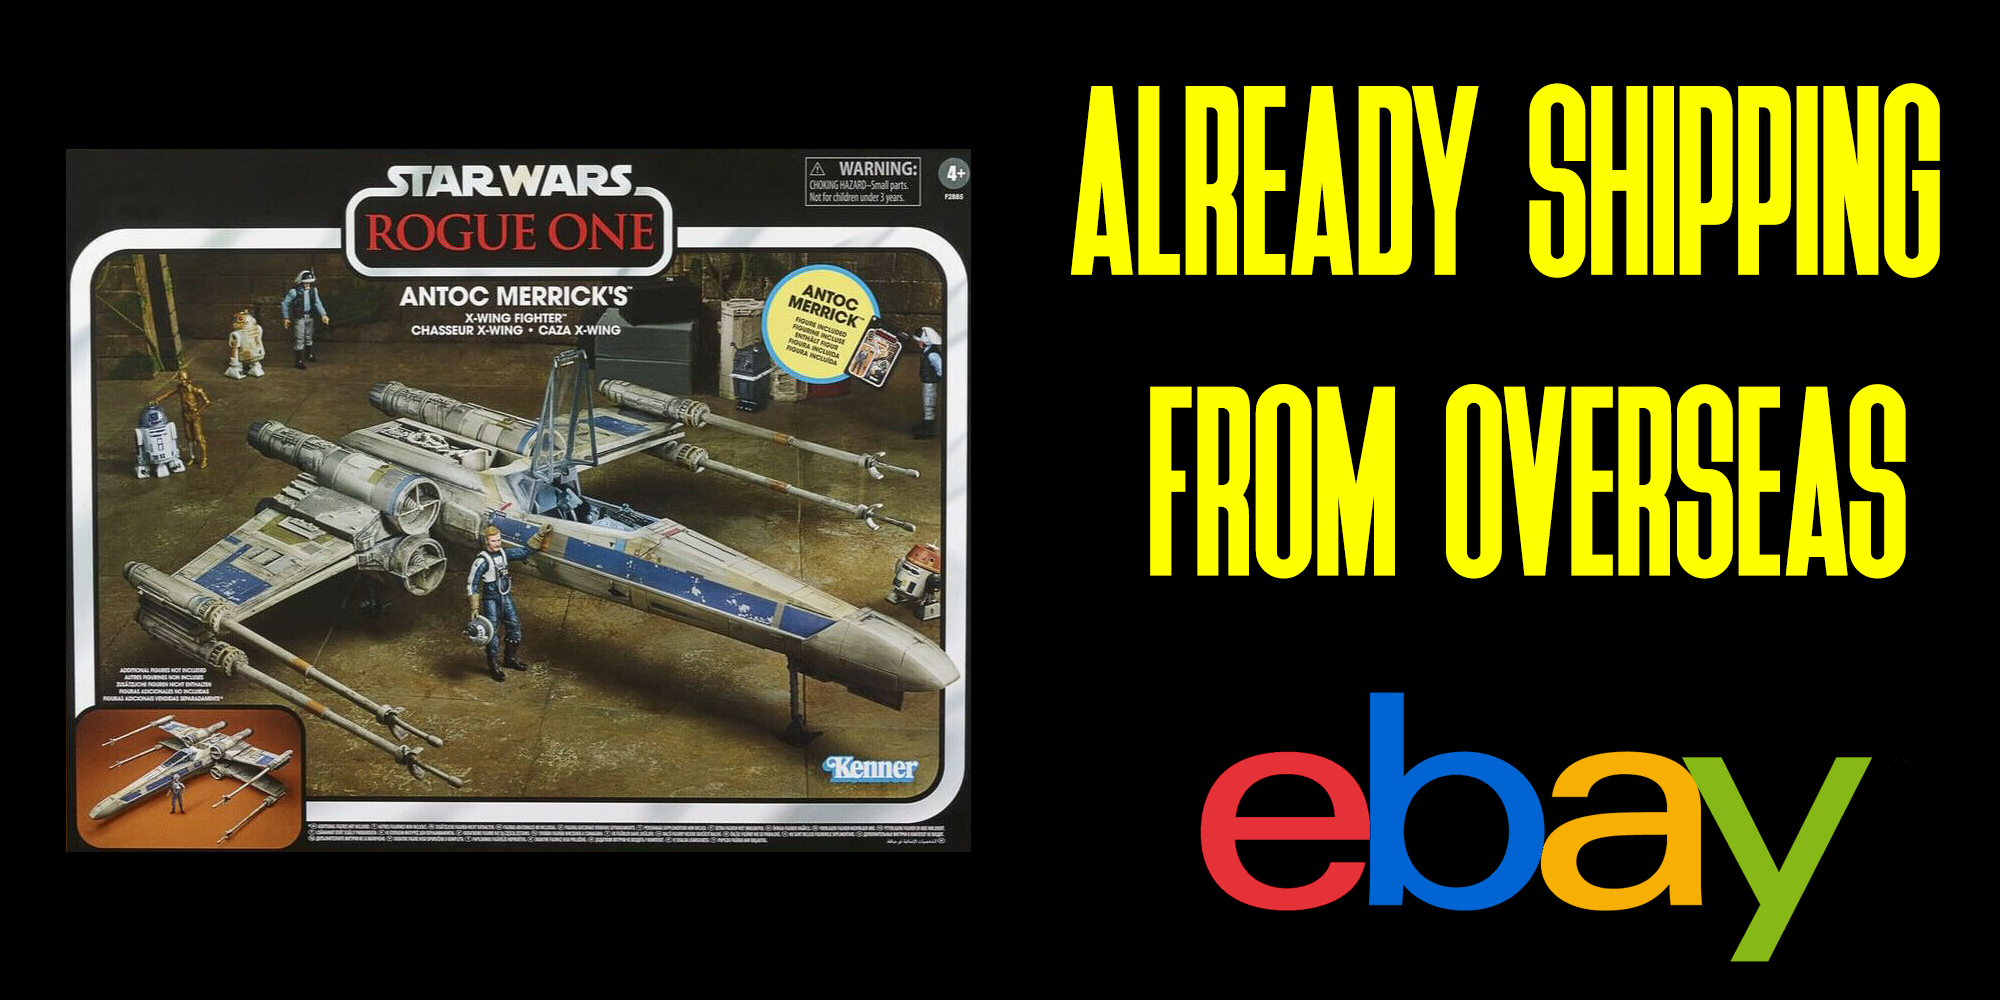 The Vintage Collection X-Wing Fighter (Rogue One) Is Already In Stock Overseas